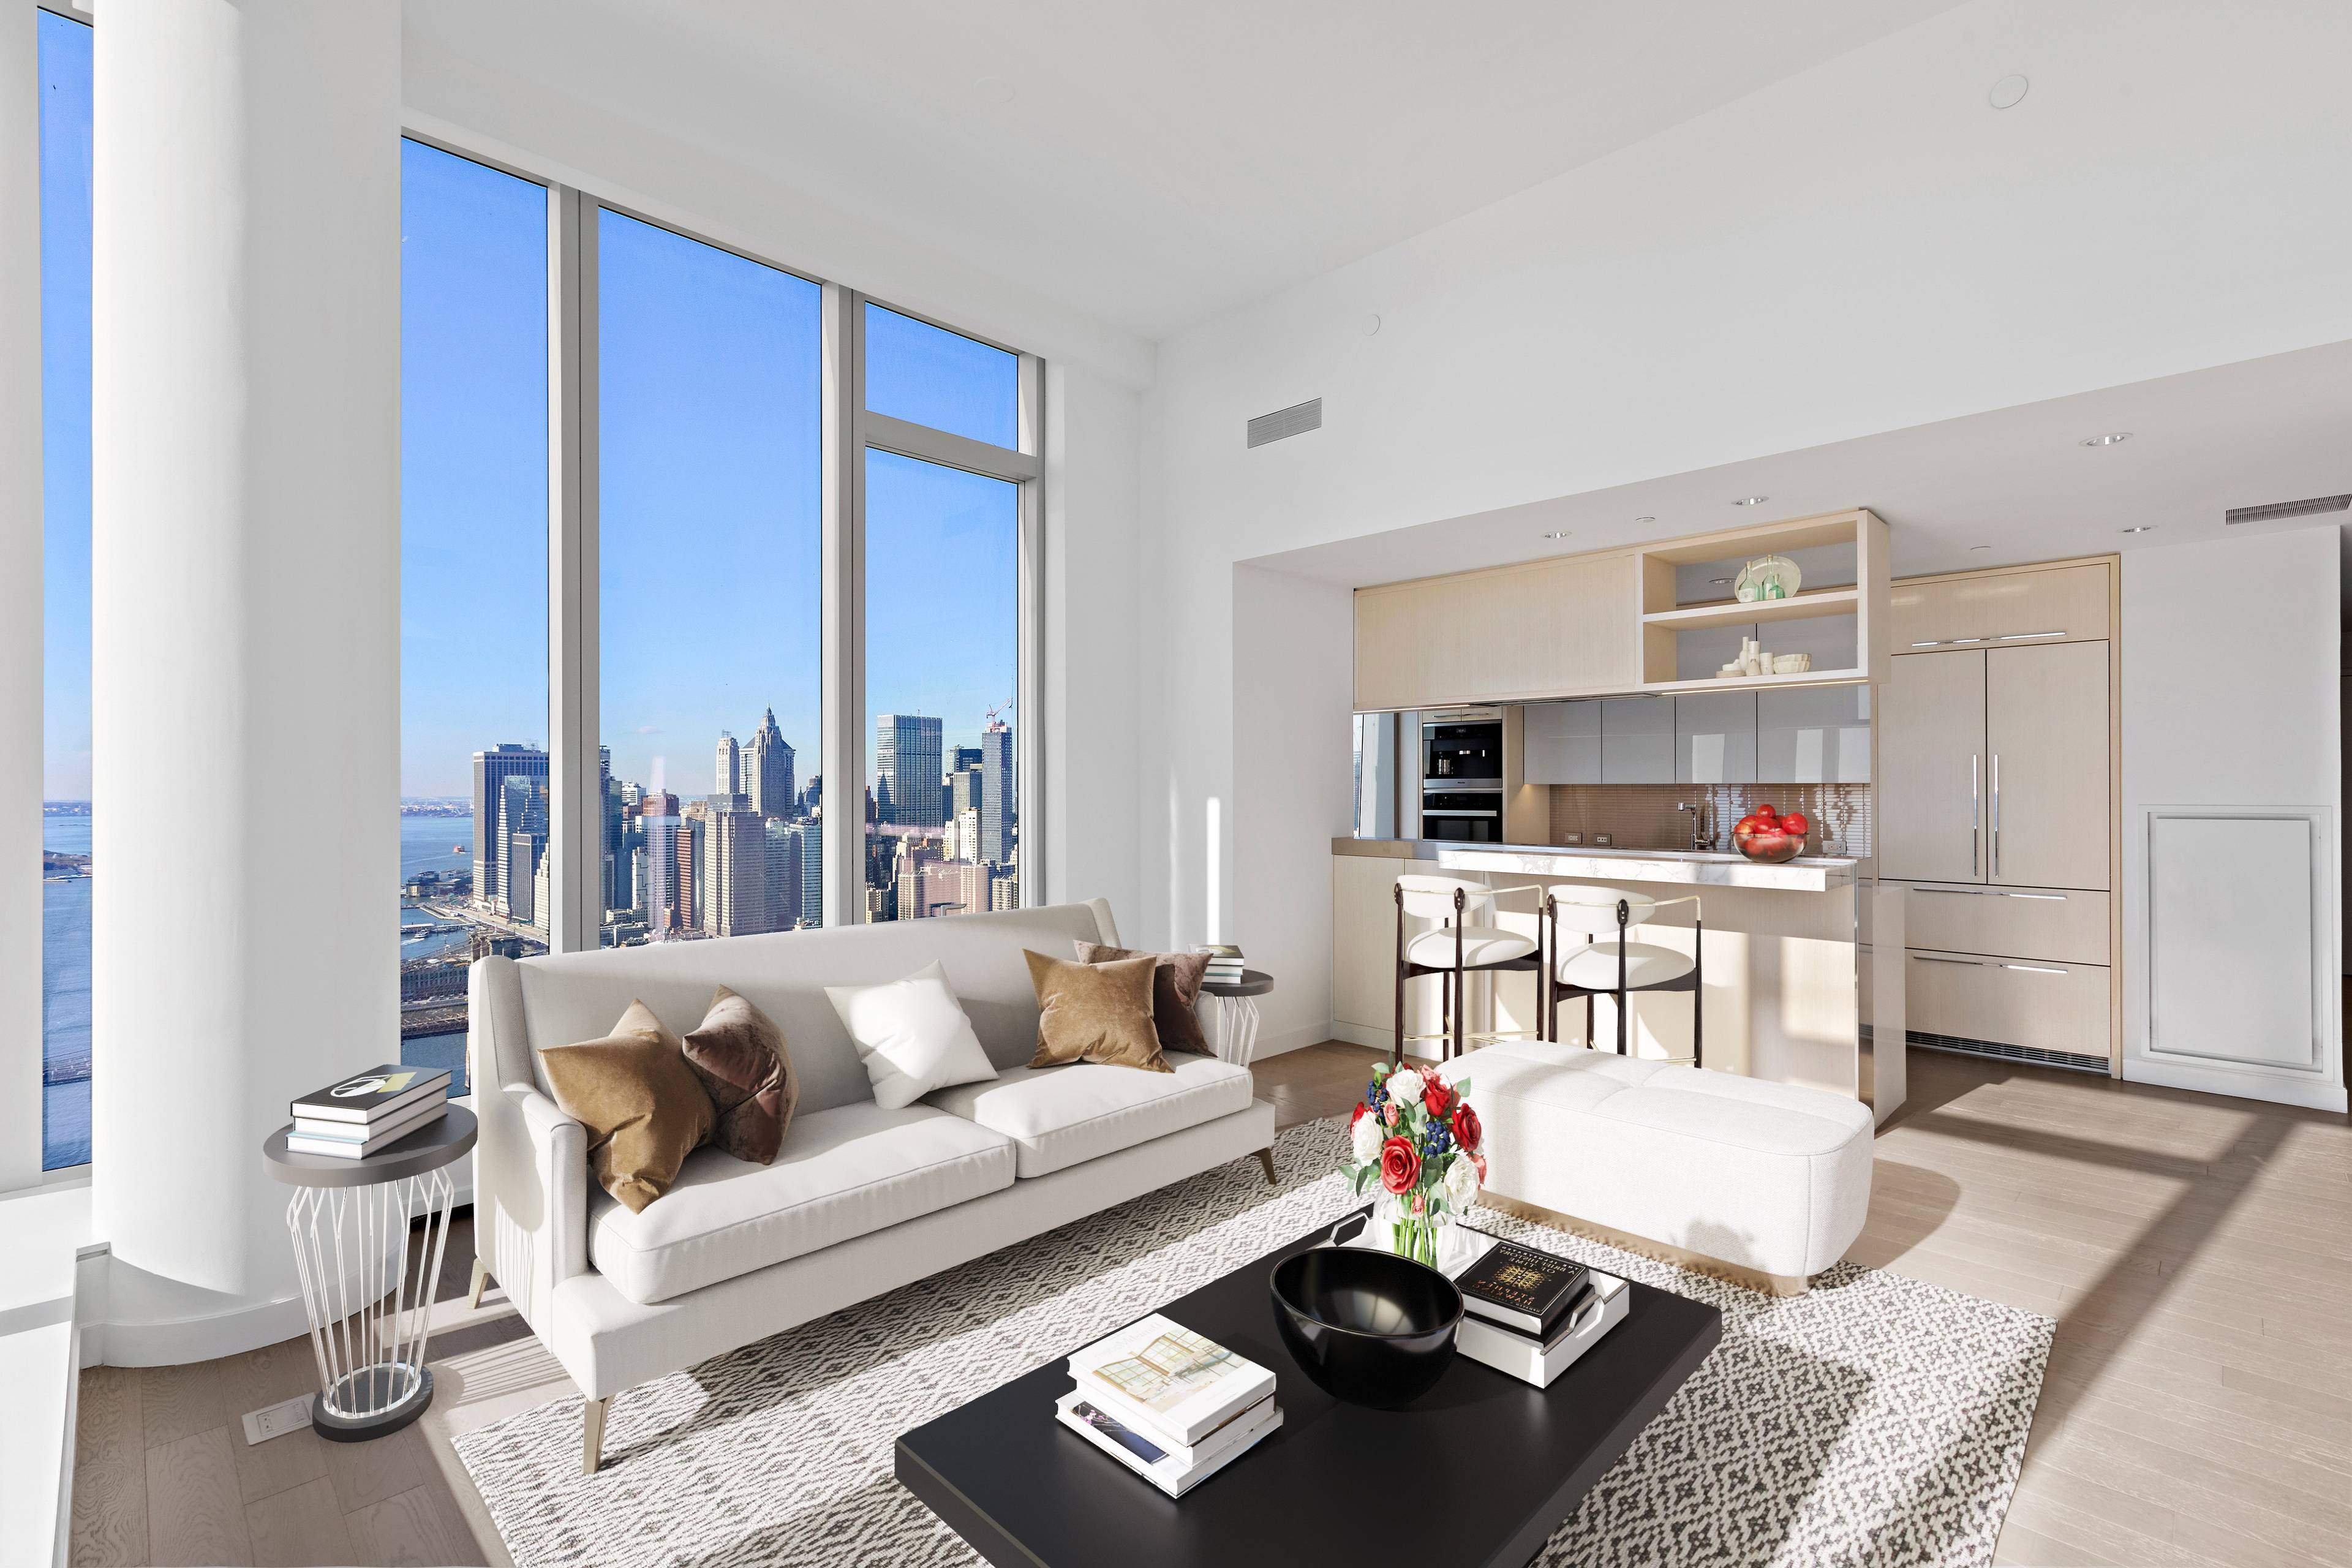 NO FEE | 3BD 3BA Residence w/ Skyline Views at the Luxurious One Manhattan Square | LES